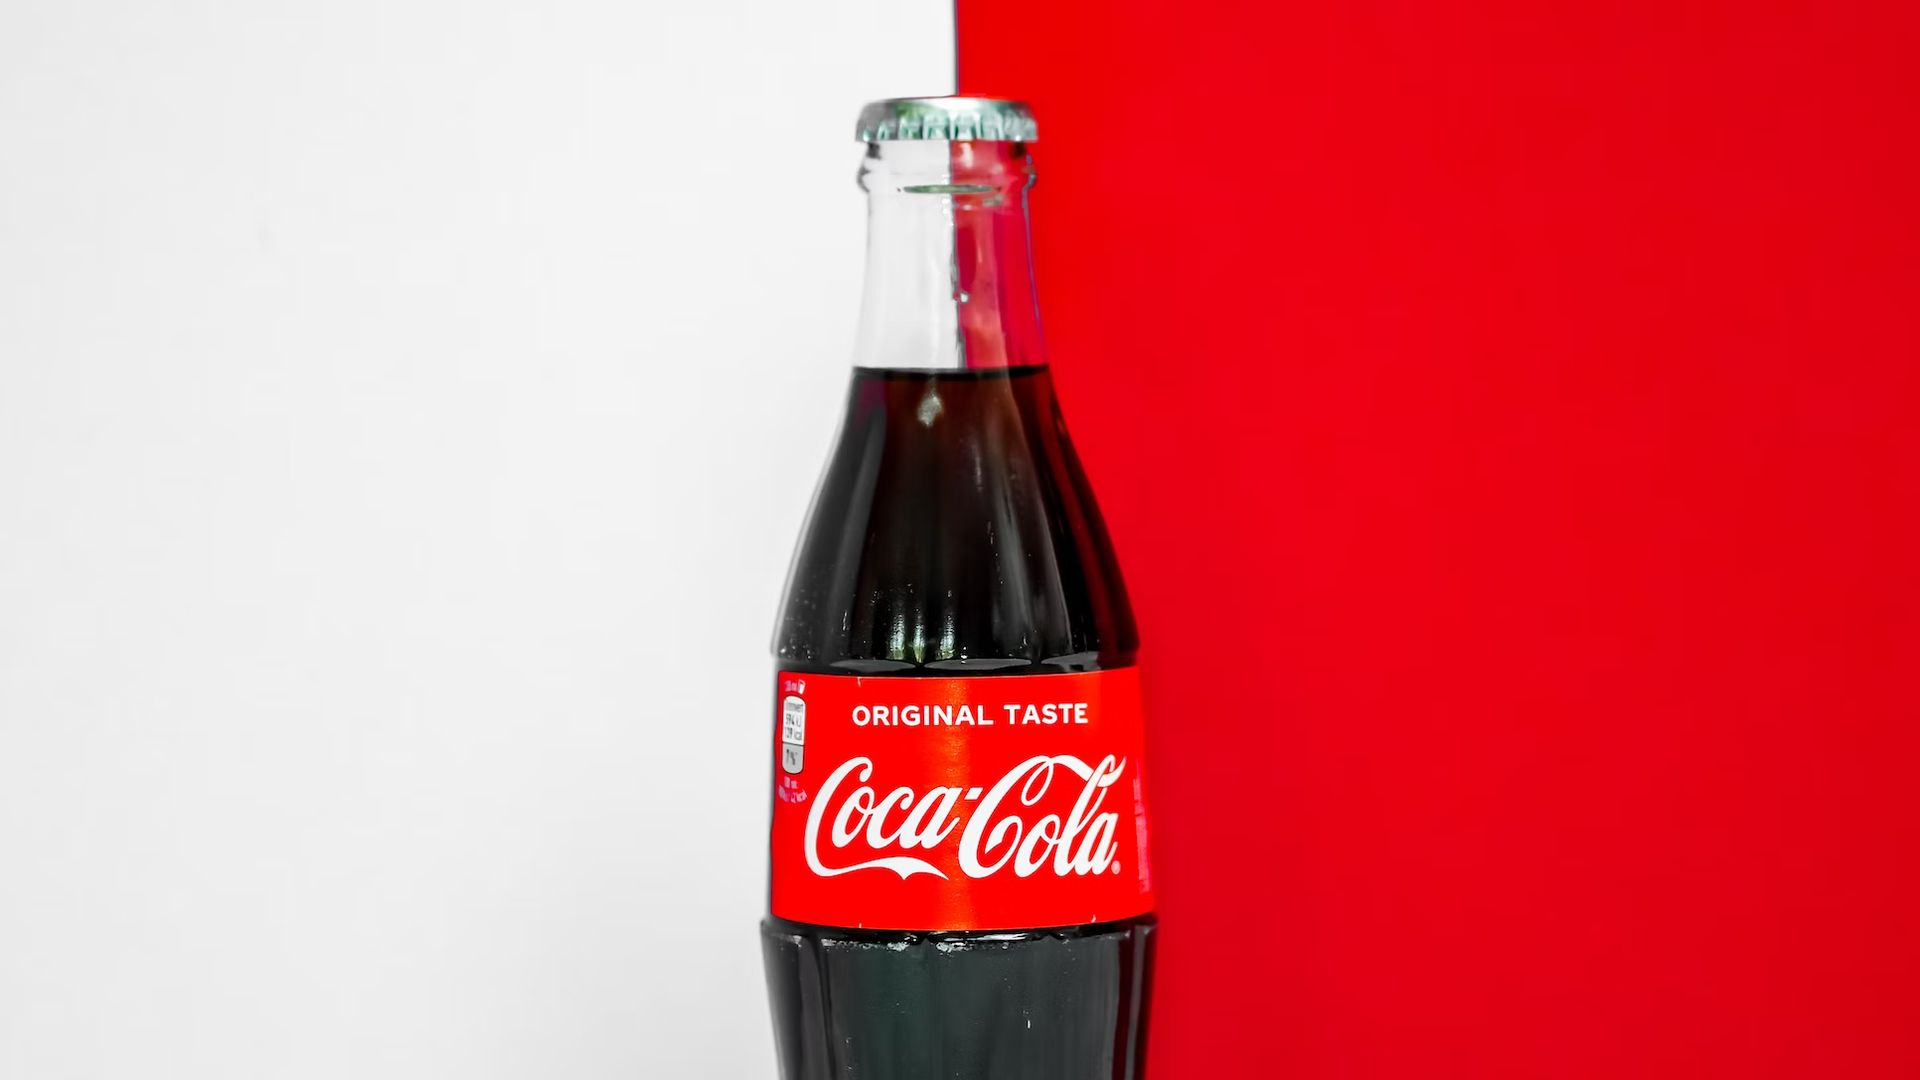 The Coca-Cola NFT collection is now available on OpenSea. To commemorate Pride Month, the company has released 136 digital collectibles, with all proceeds going to LGBTQIA+ charity.